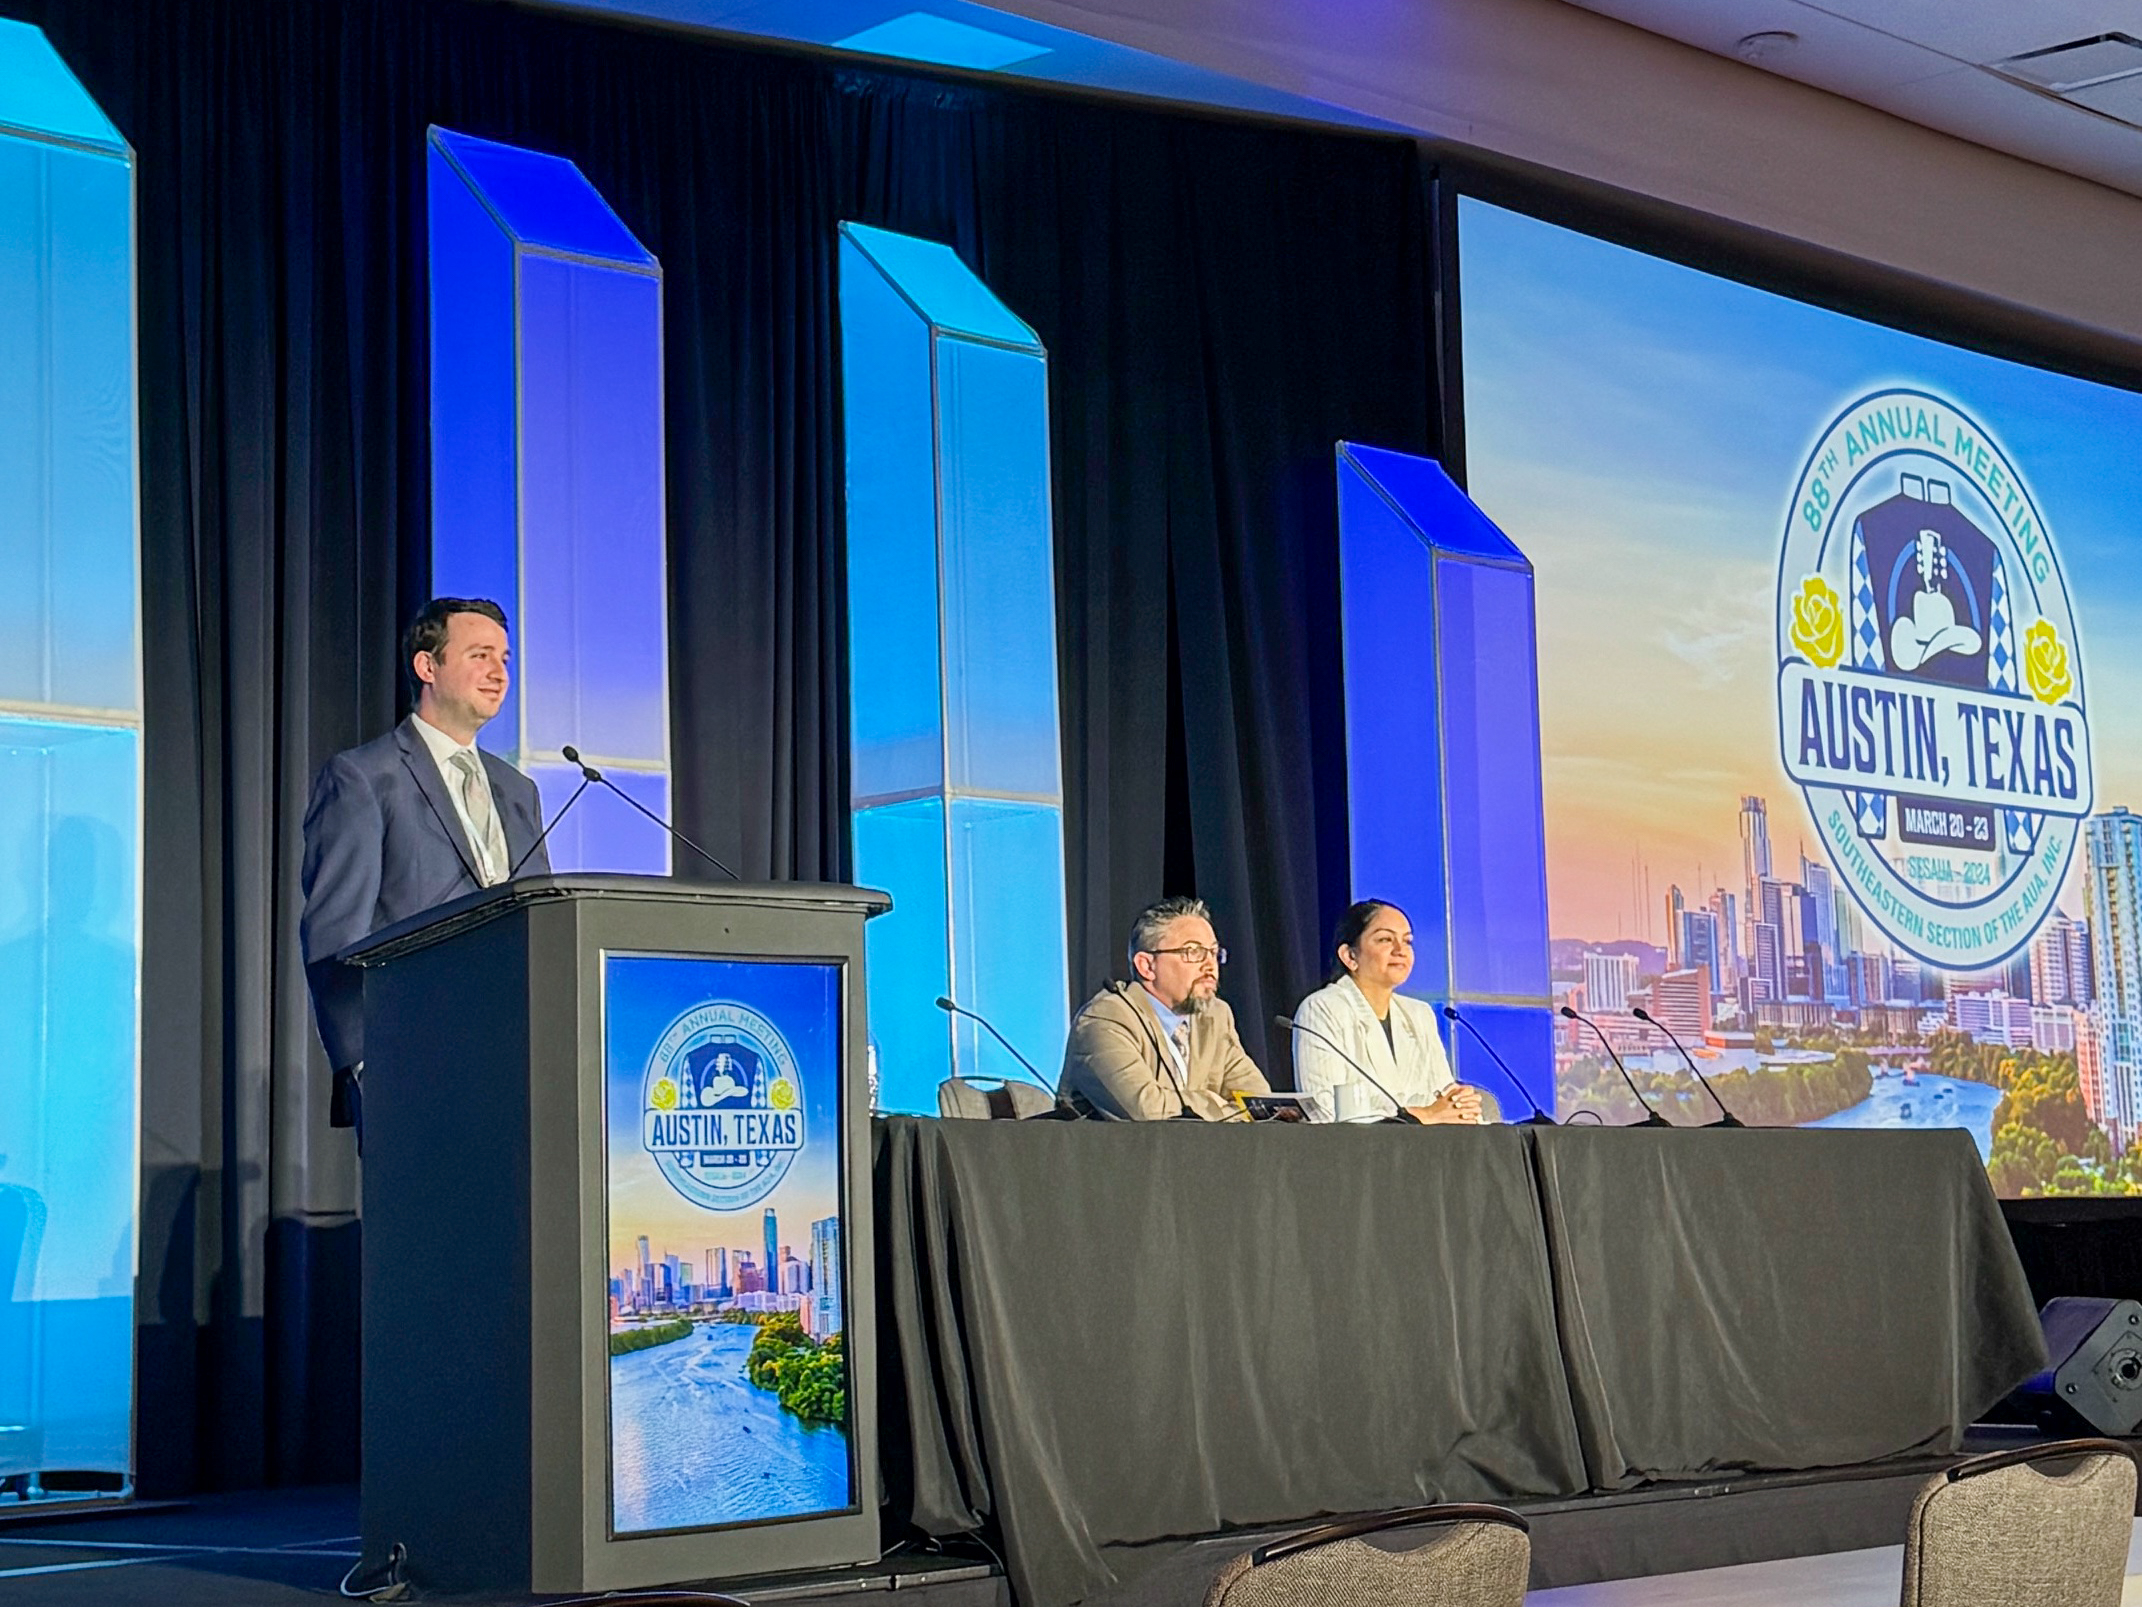 Dr. Seth Teplitsky presenting at a podium with a large screen behind him that SES AUA 2024